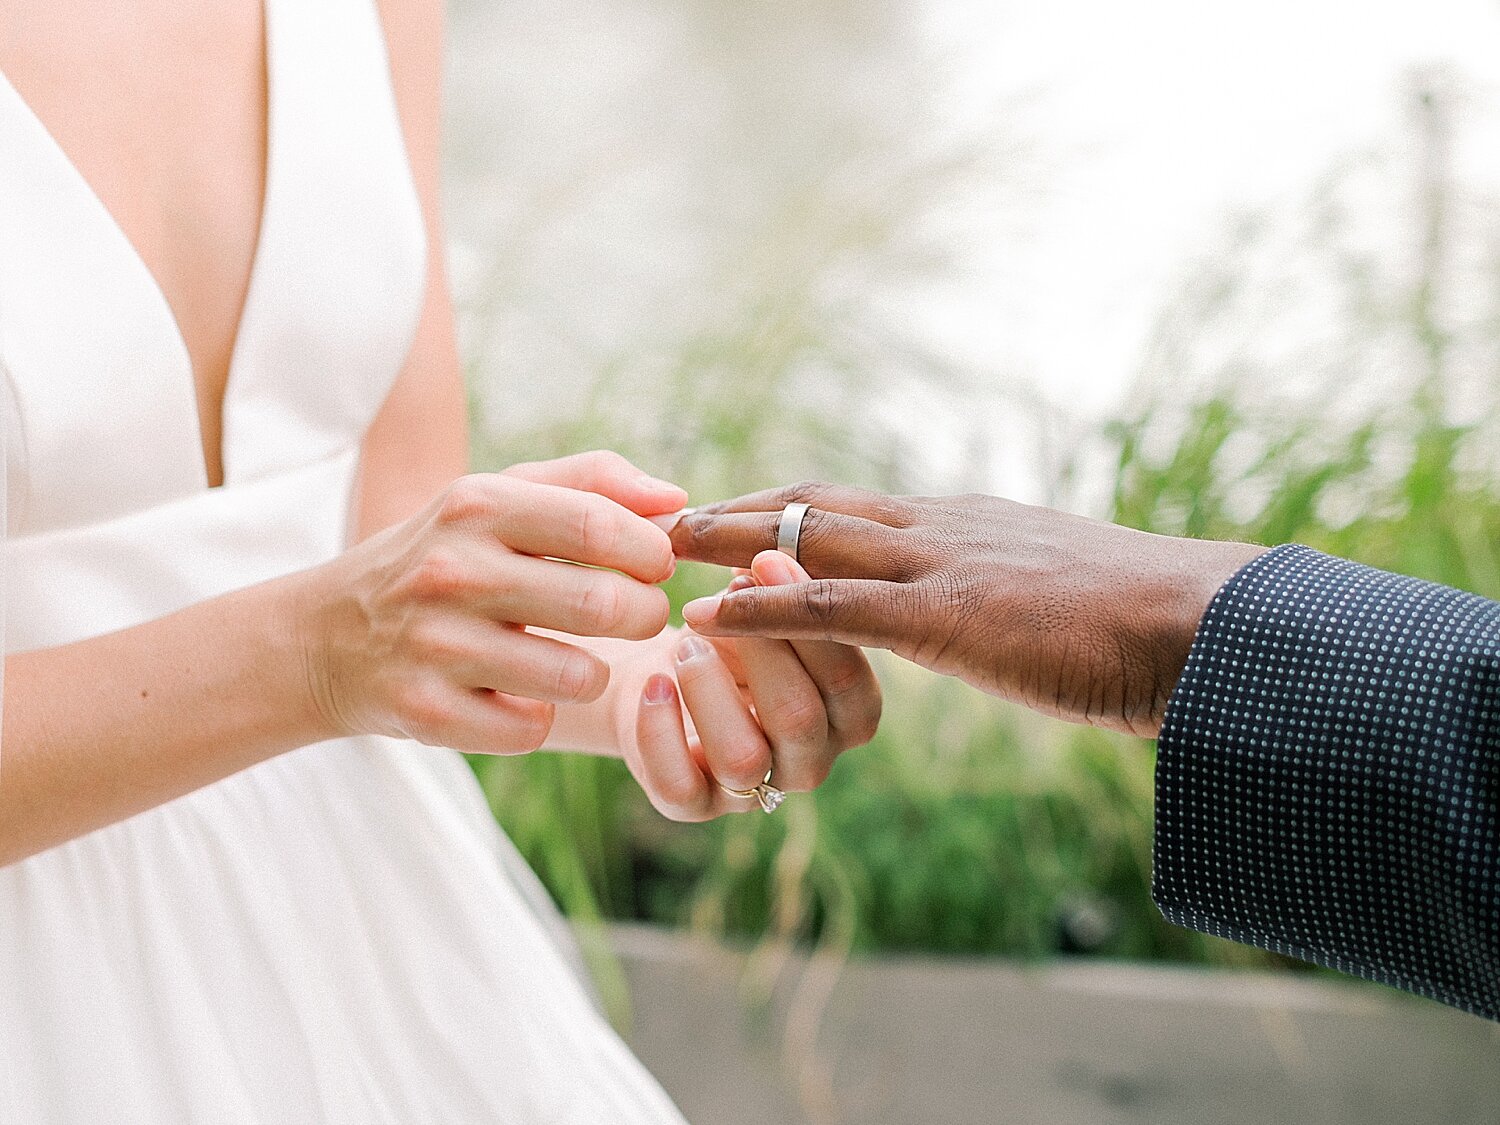 bride and groom exchange rings during intimate wedding ceremony at Celestine | Asher Gardner Photography | Intimate Ceremony in DUMBO New York